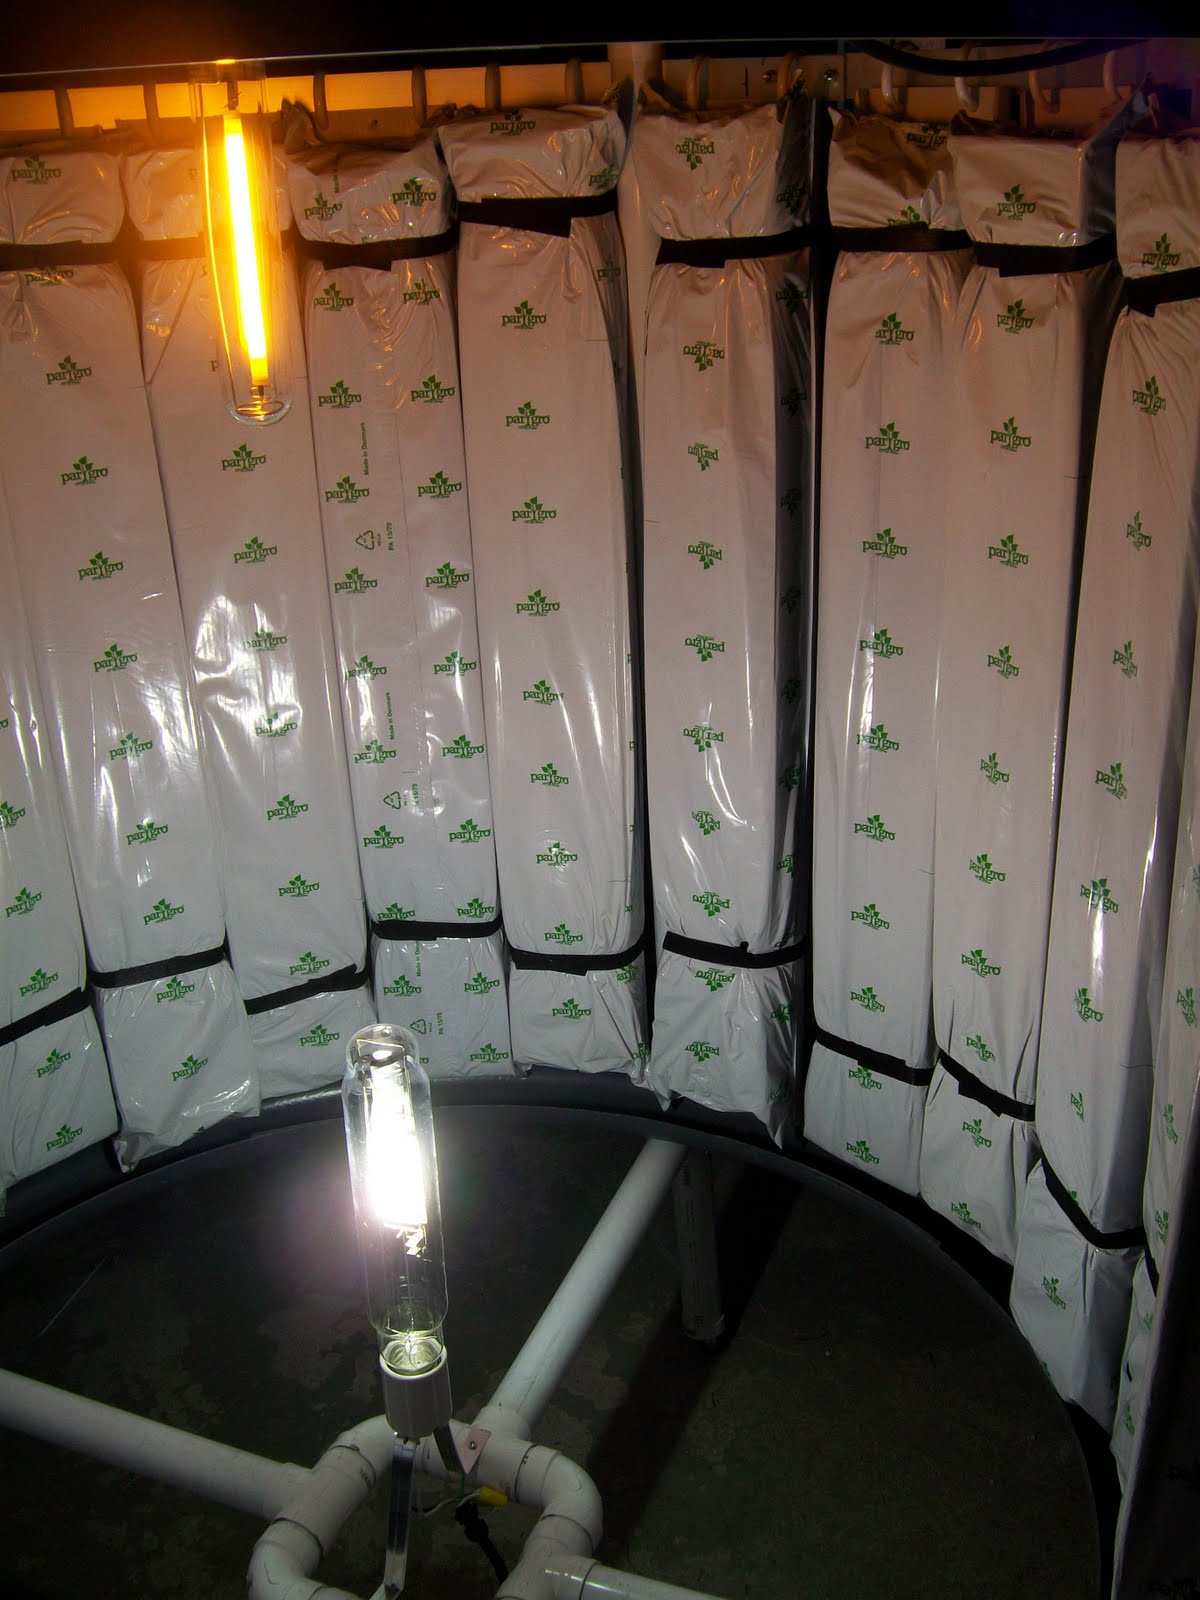 ... Hydroponic Store Grow Shop, Montreal Hydroponic Supply: DIY VERTICAL